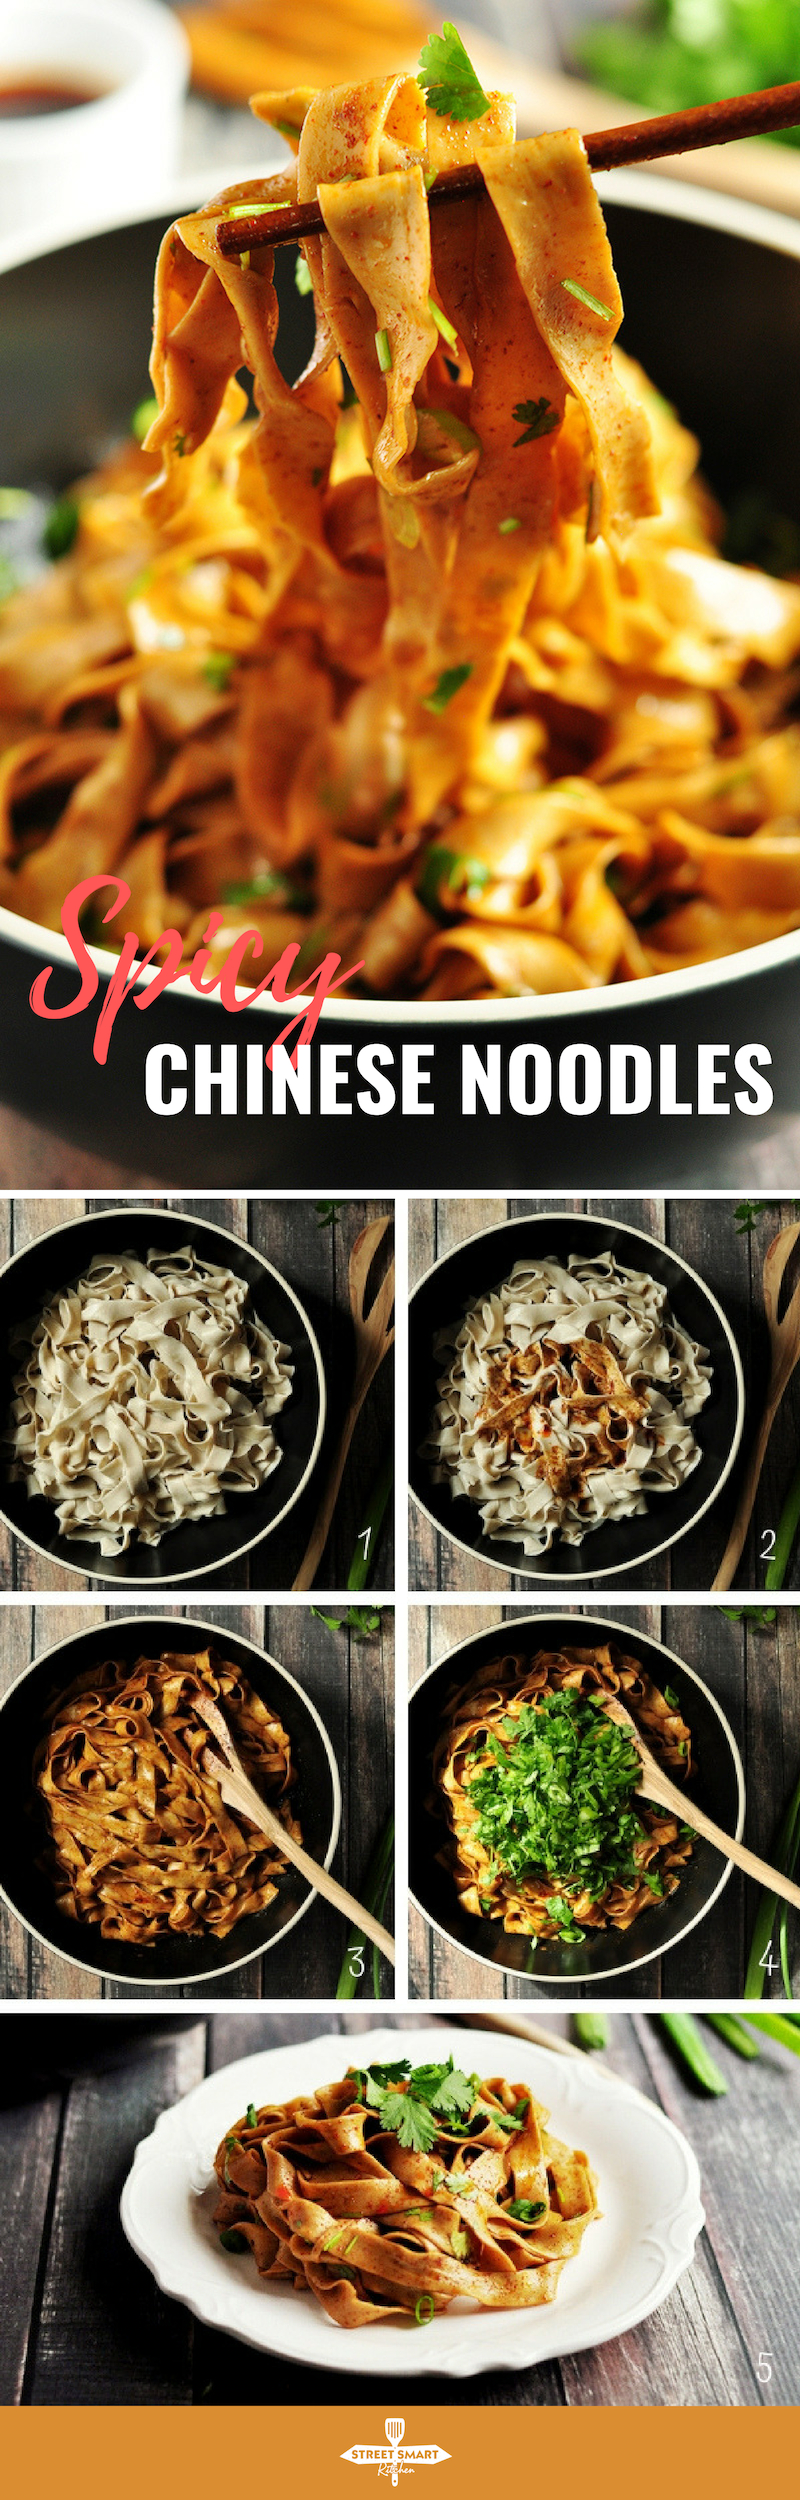 What’s savory, spicy, and requires only six ingredients? These spicy Chinese noodles made with hot chili oil for authentic flavor. Gluten-free option included.